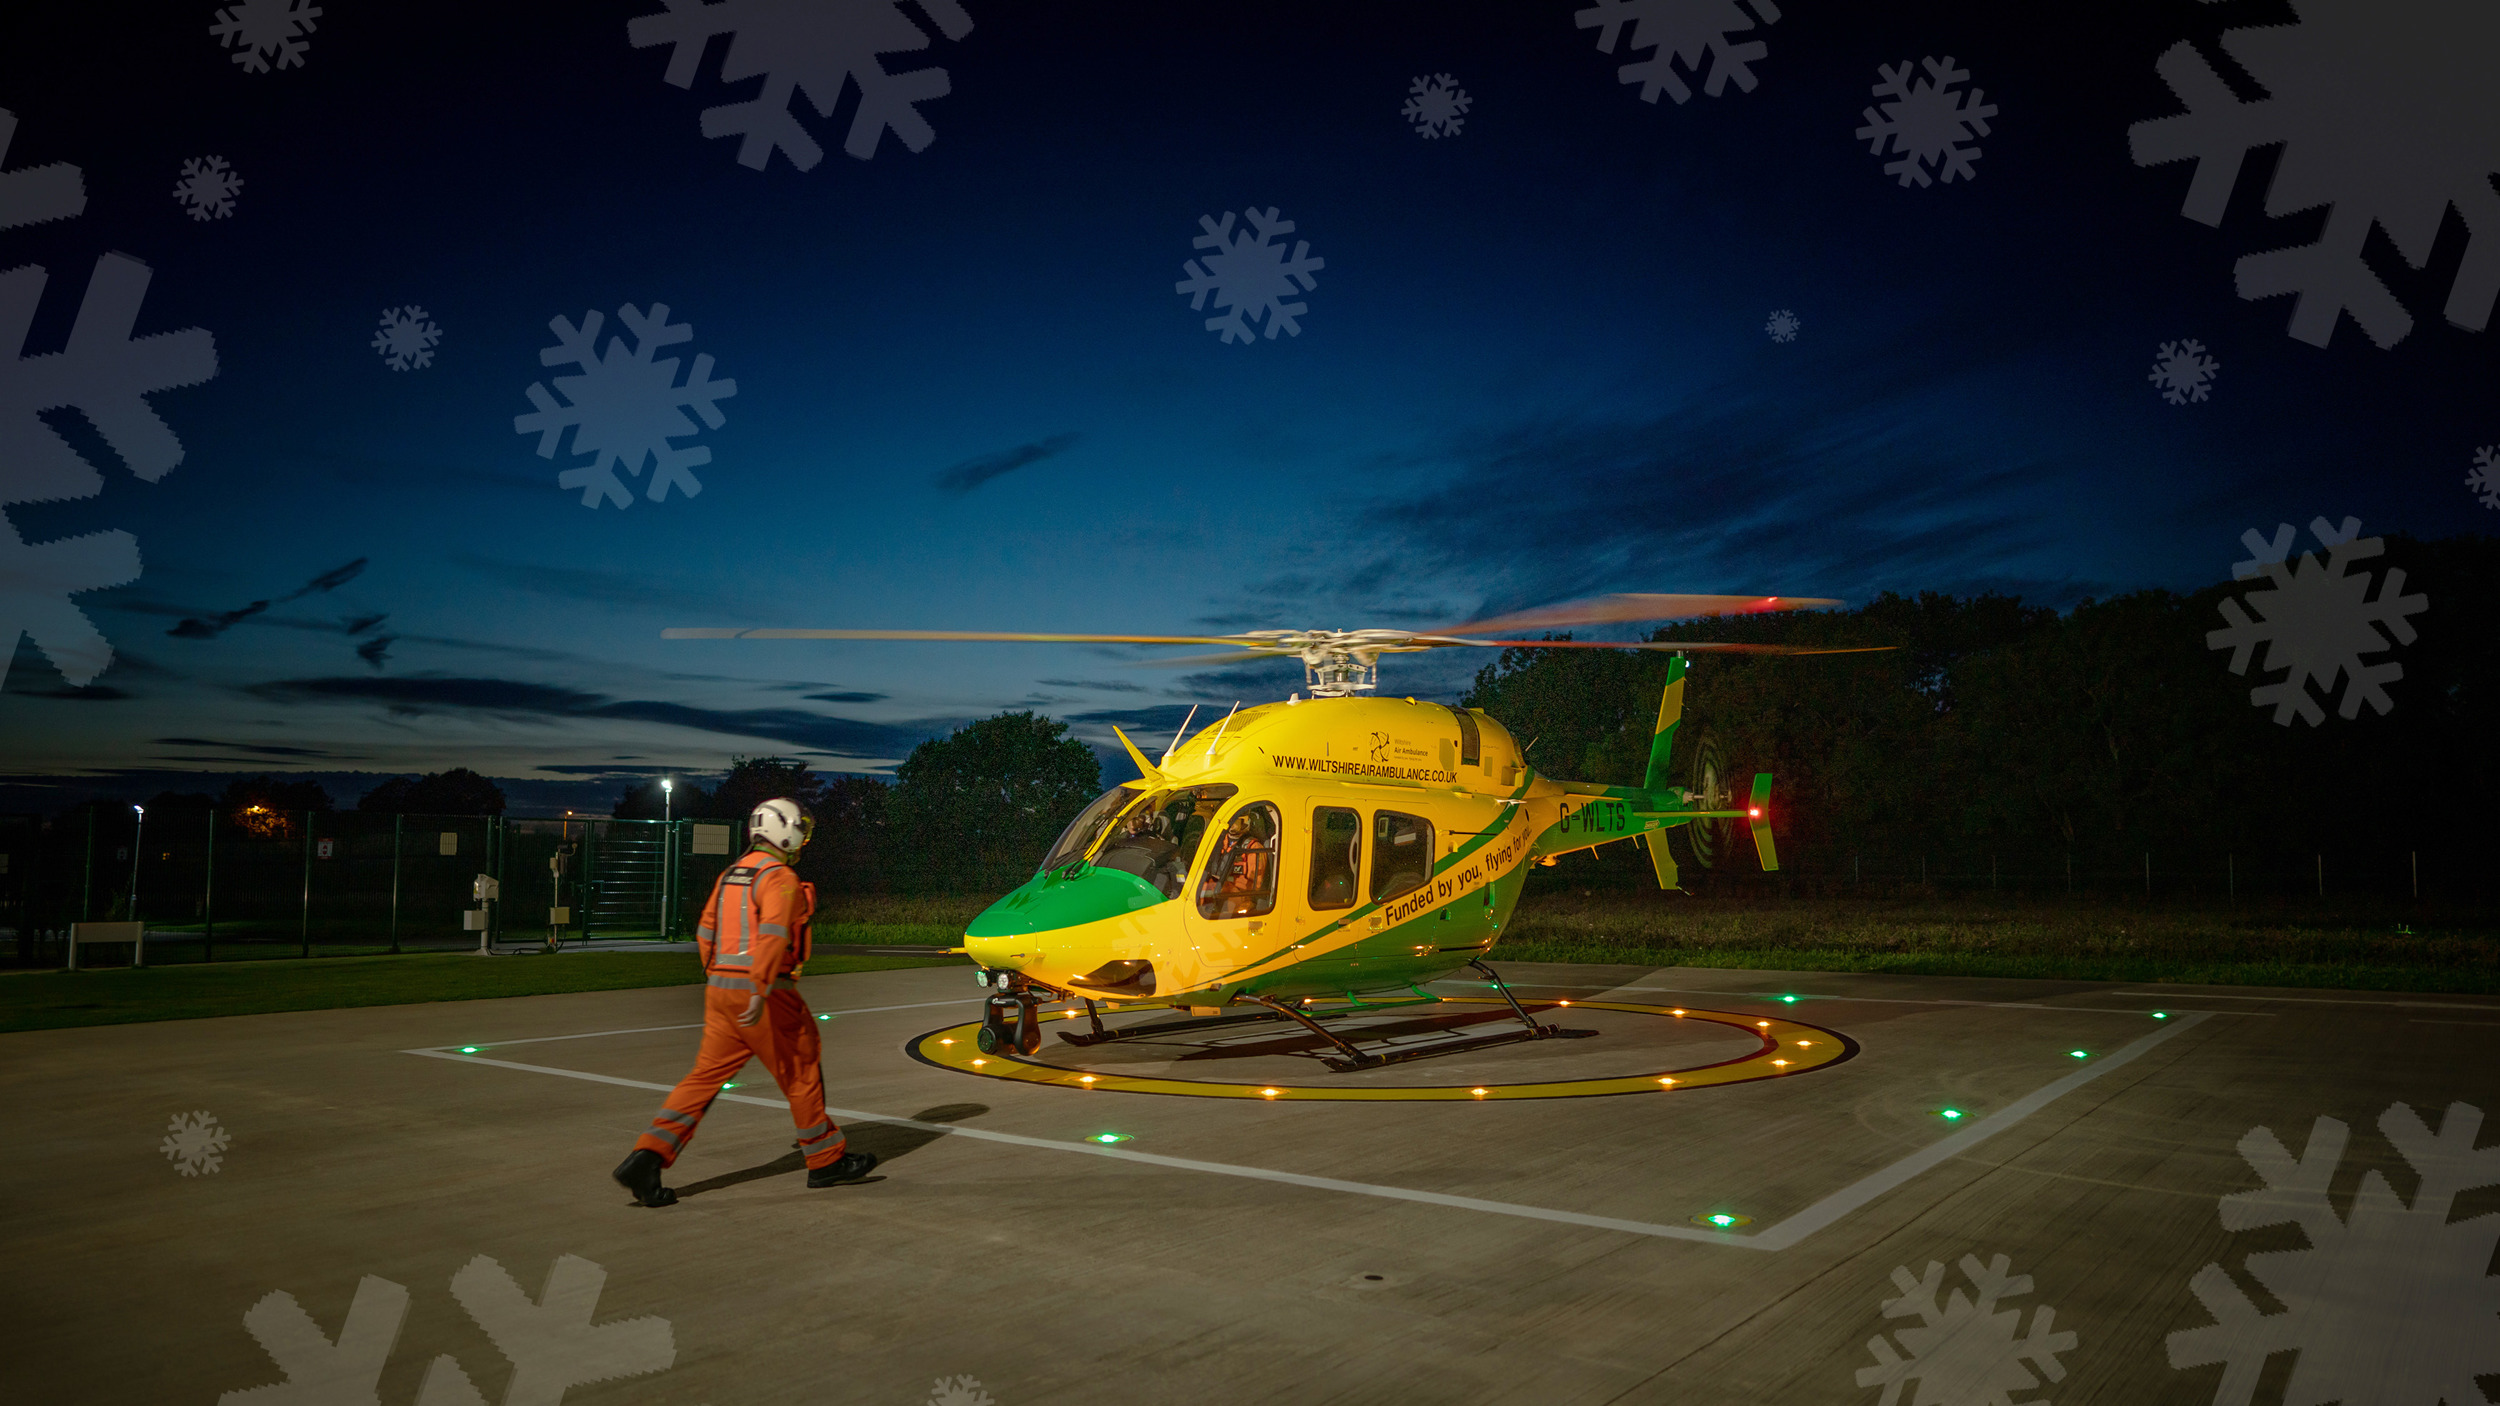 WAA helicopter on a helipad with snowflakes